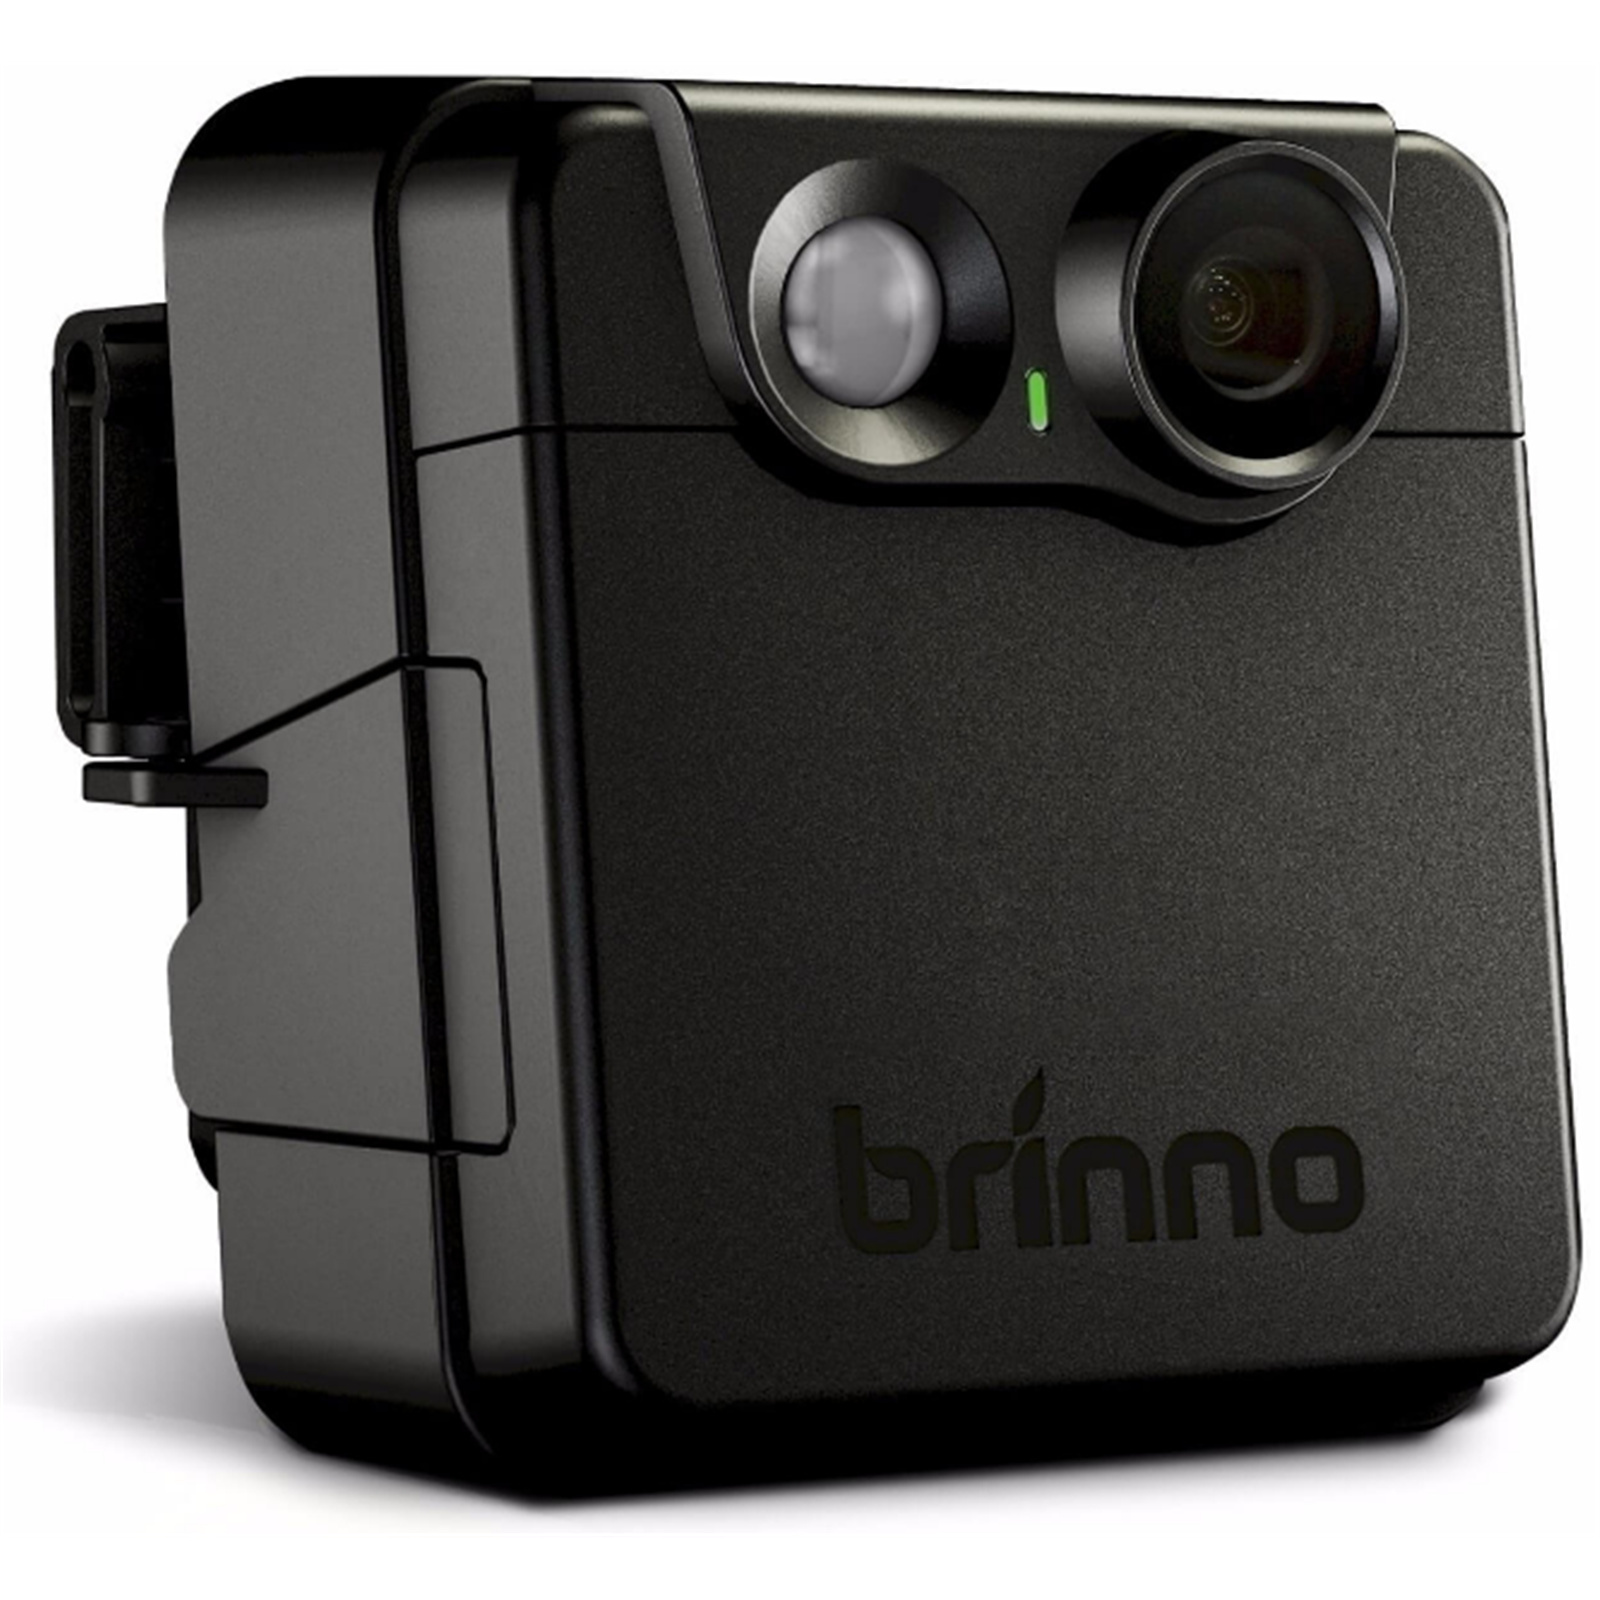 Brinno BNMAC200DN Day/Night Motion Activated Security Camera